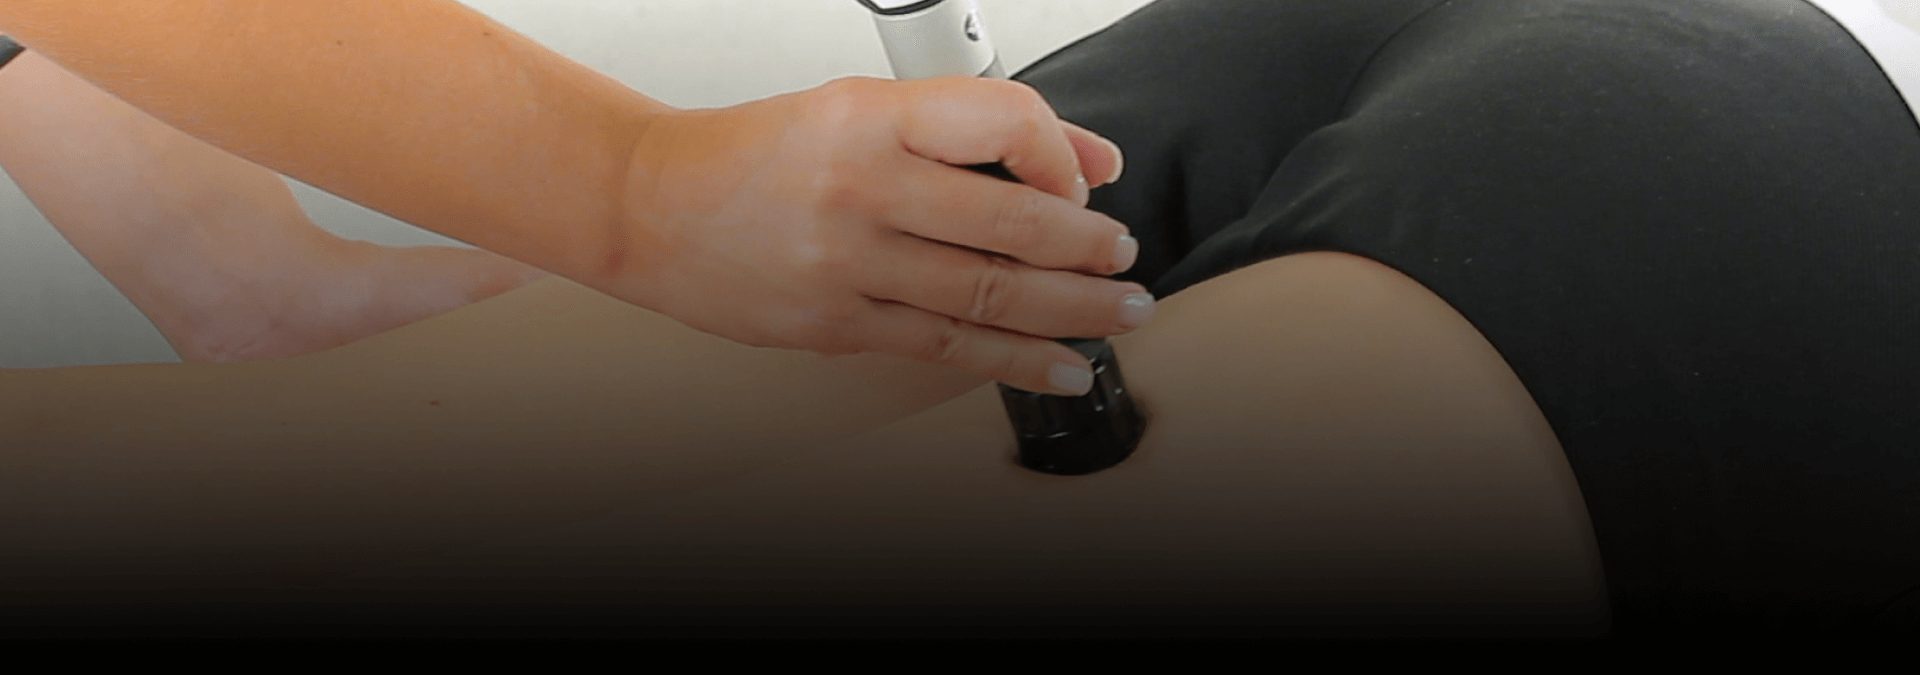 Complete Decongestive Therapy and Compression Therapy - LK Lymphoedema  Centre